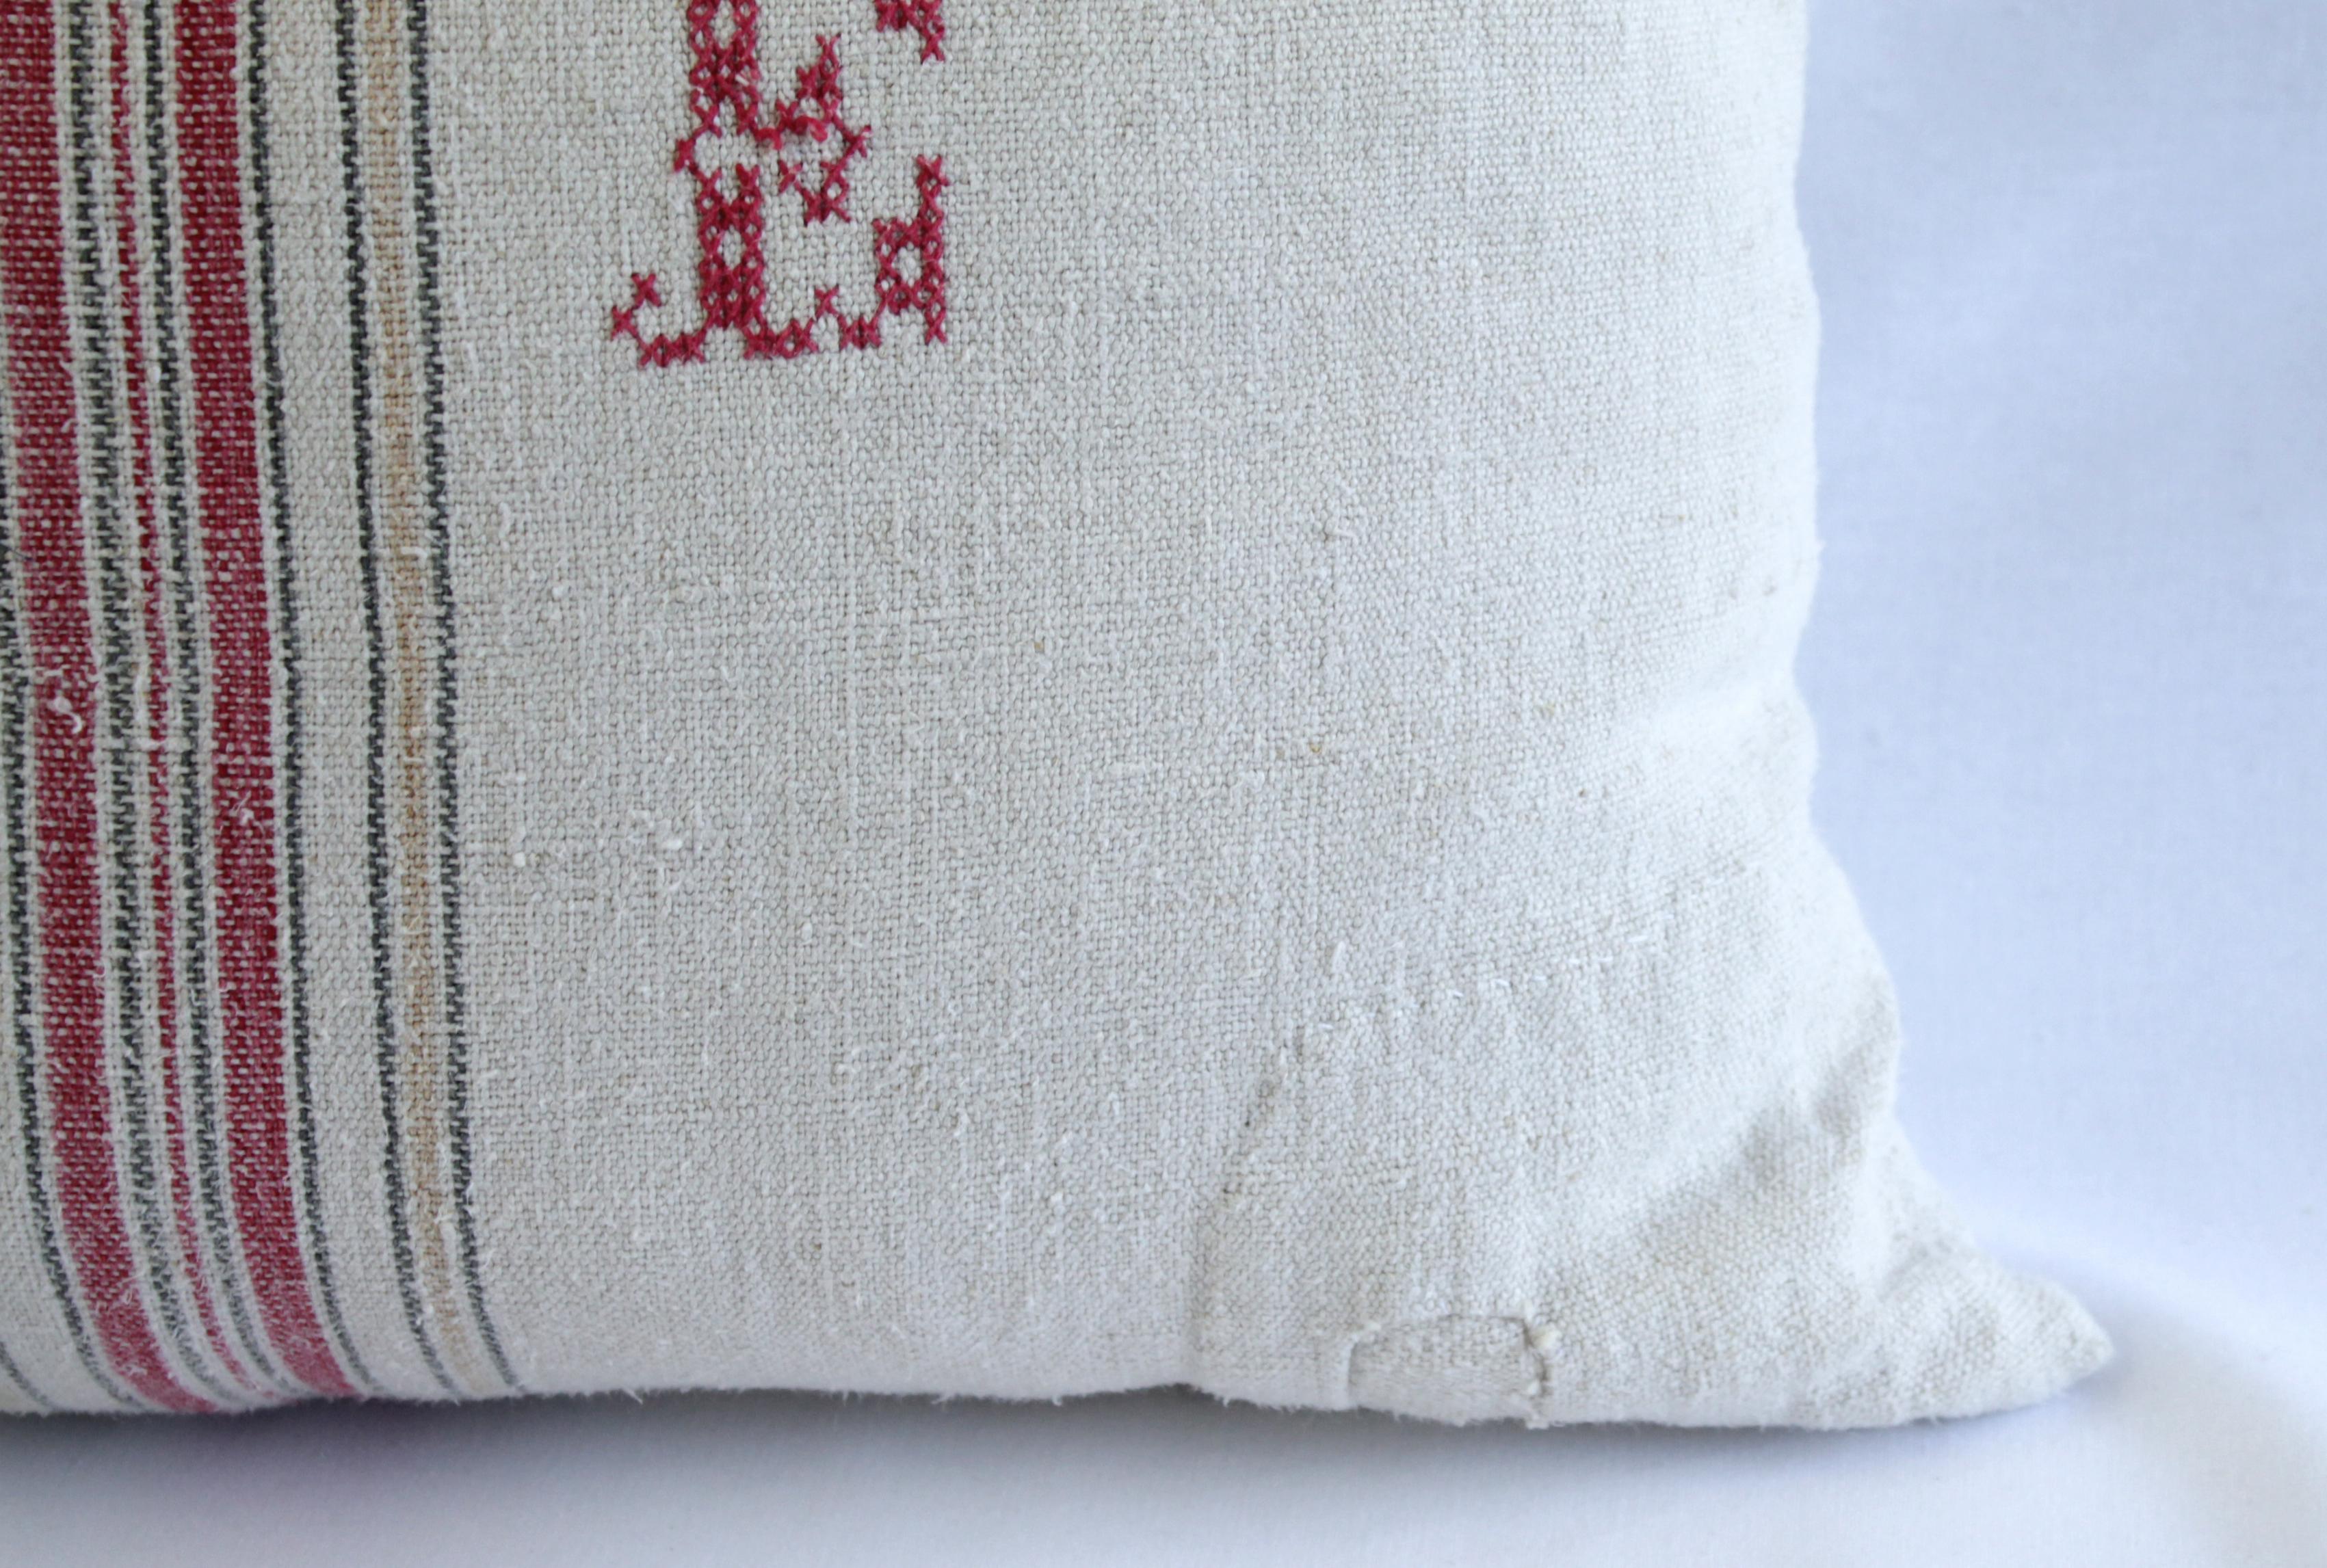 Linen Antique Nubby 19th Century European Red and Tan Stripe with a Monogram Pillow